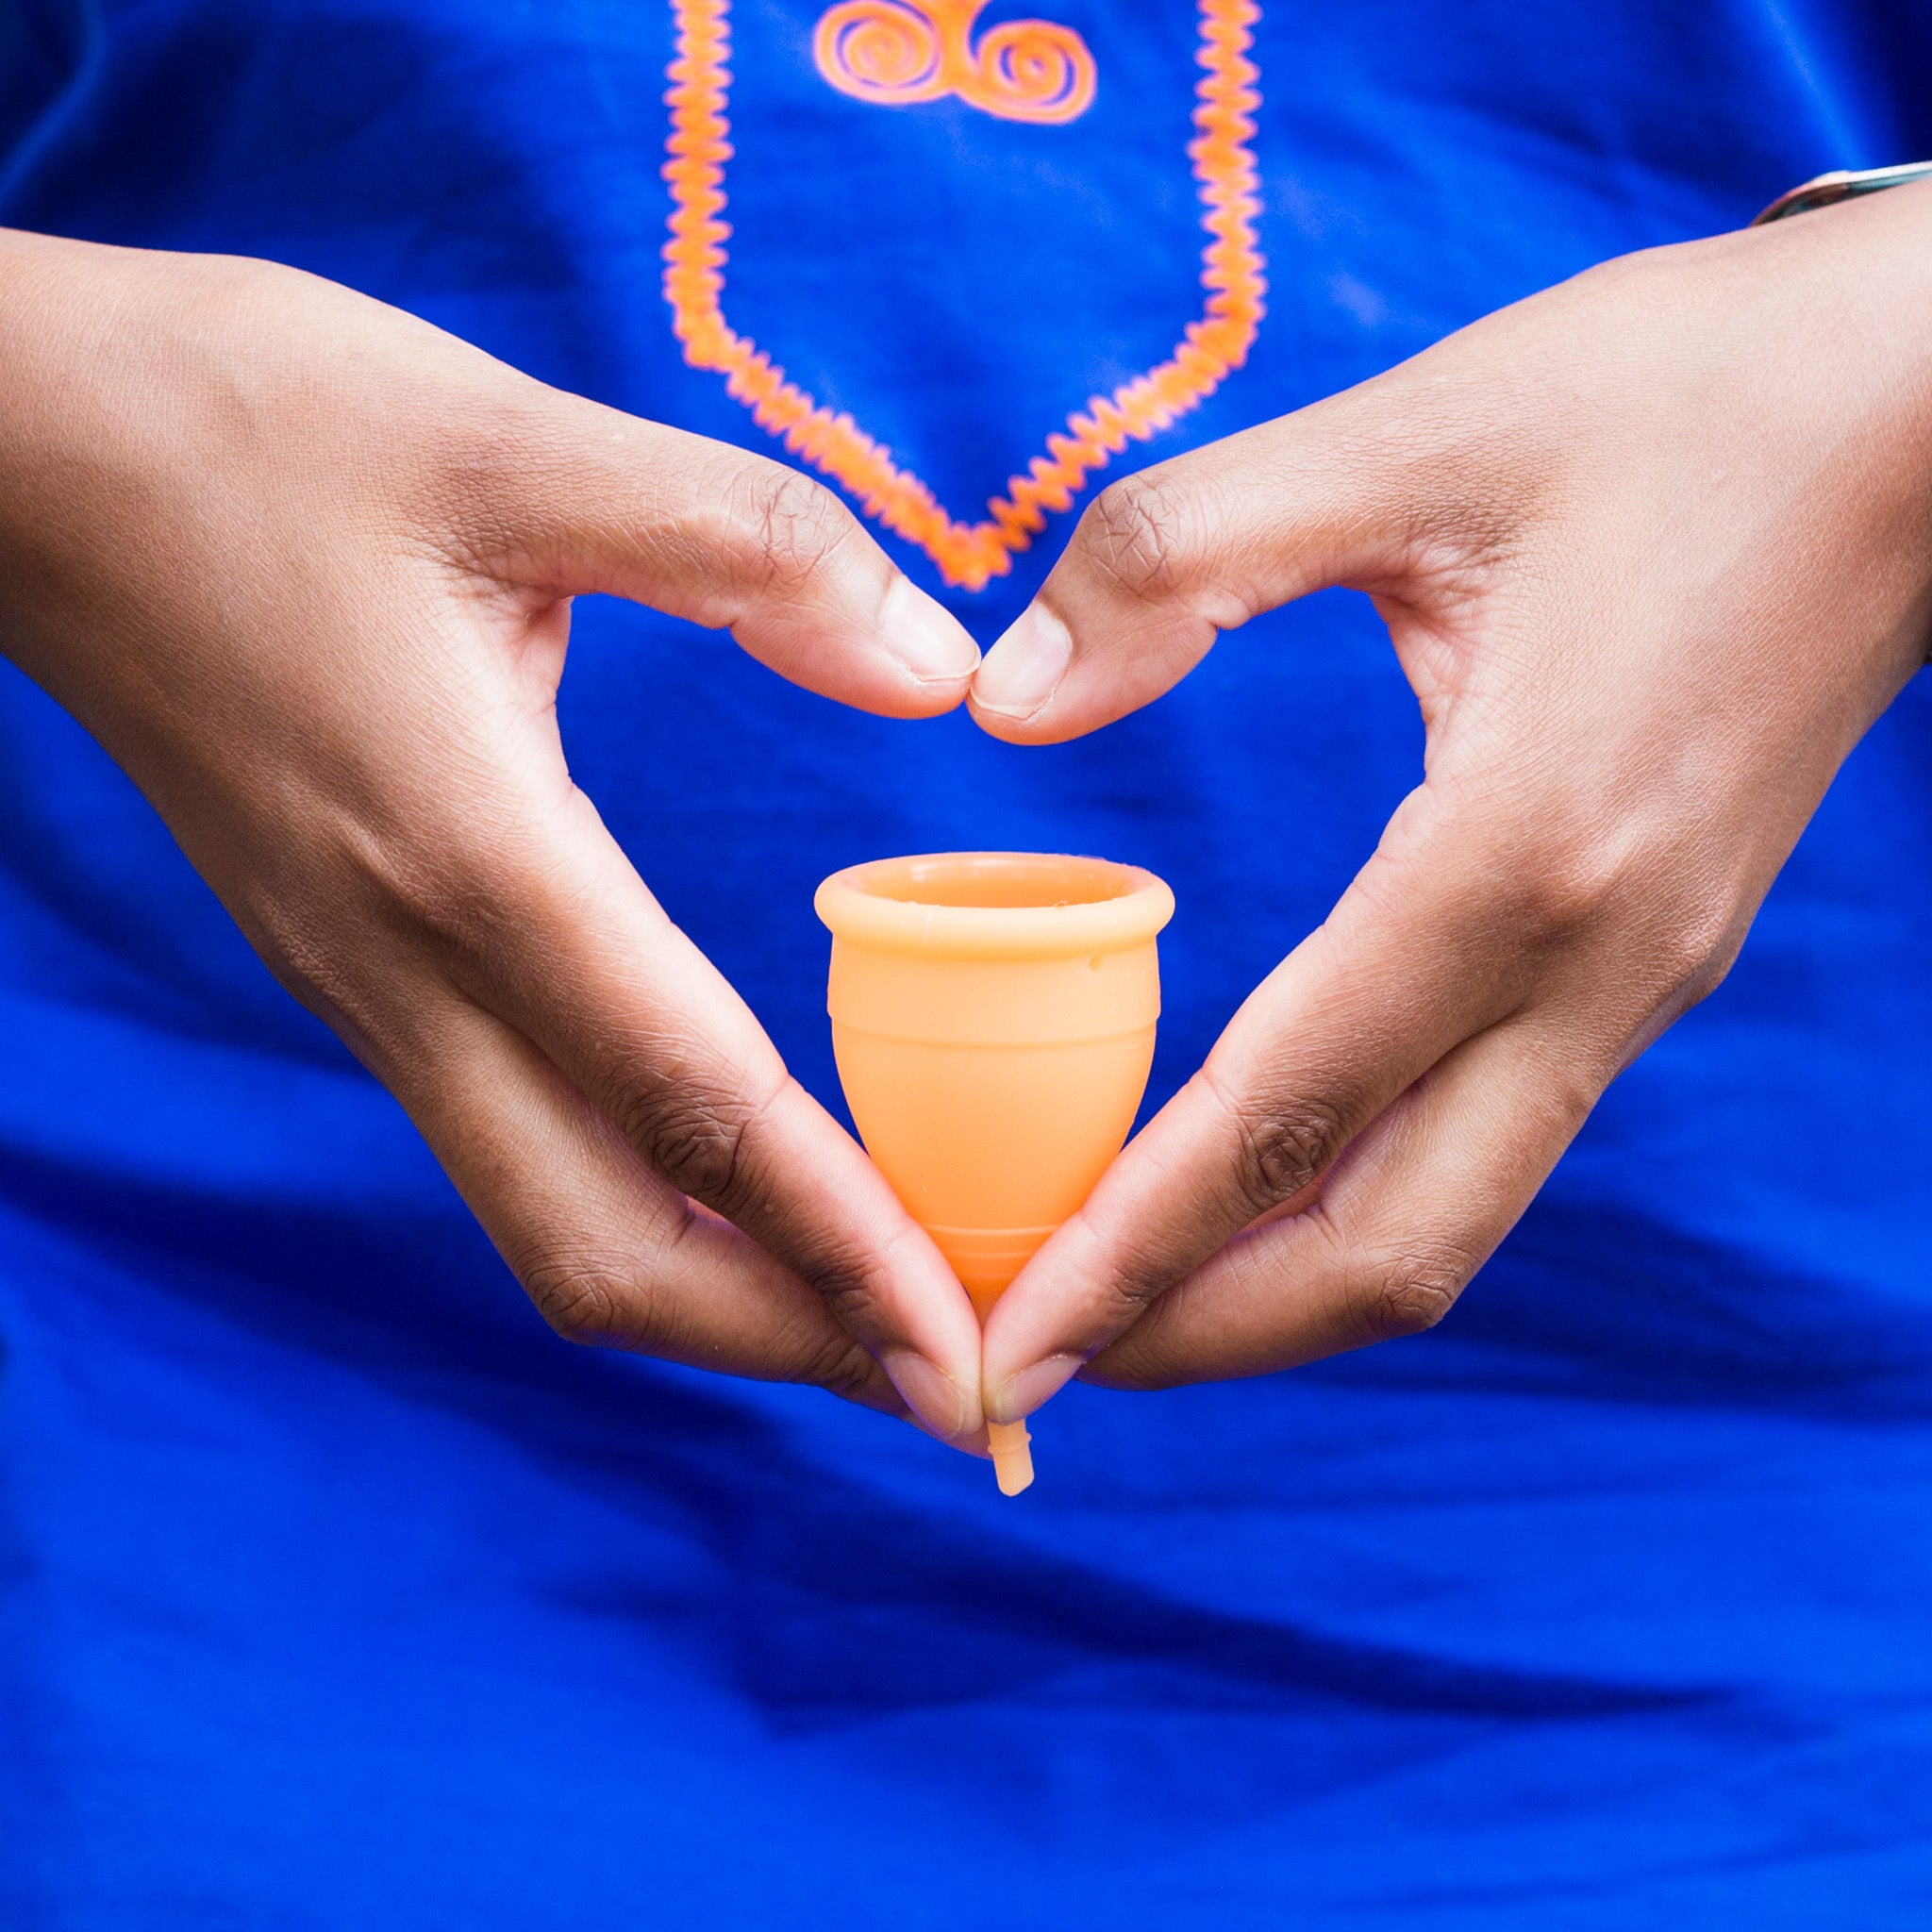 Menstrual Cup Dangers: Risks, Safety, and Benefits